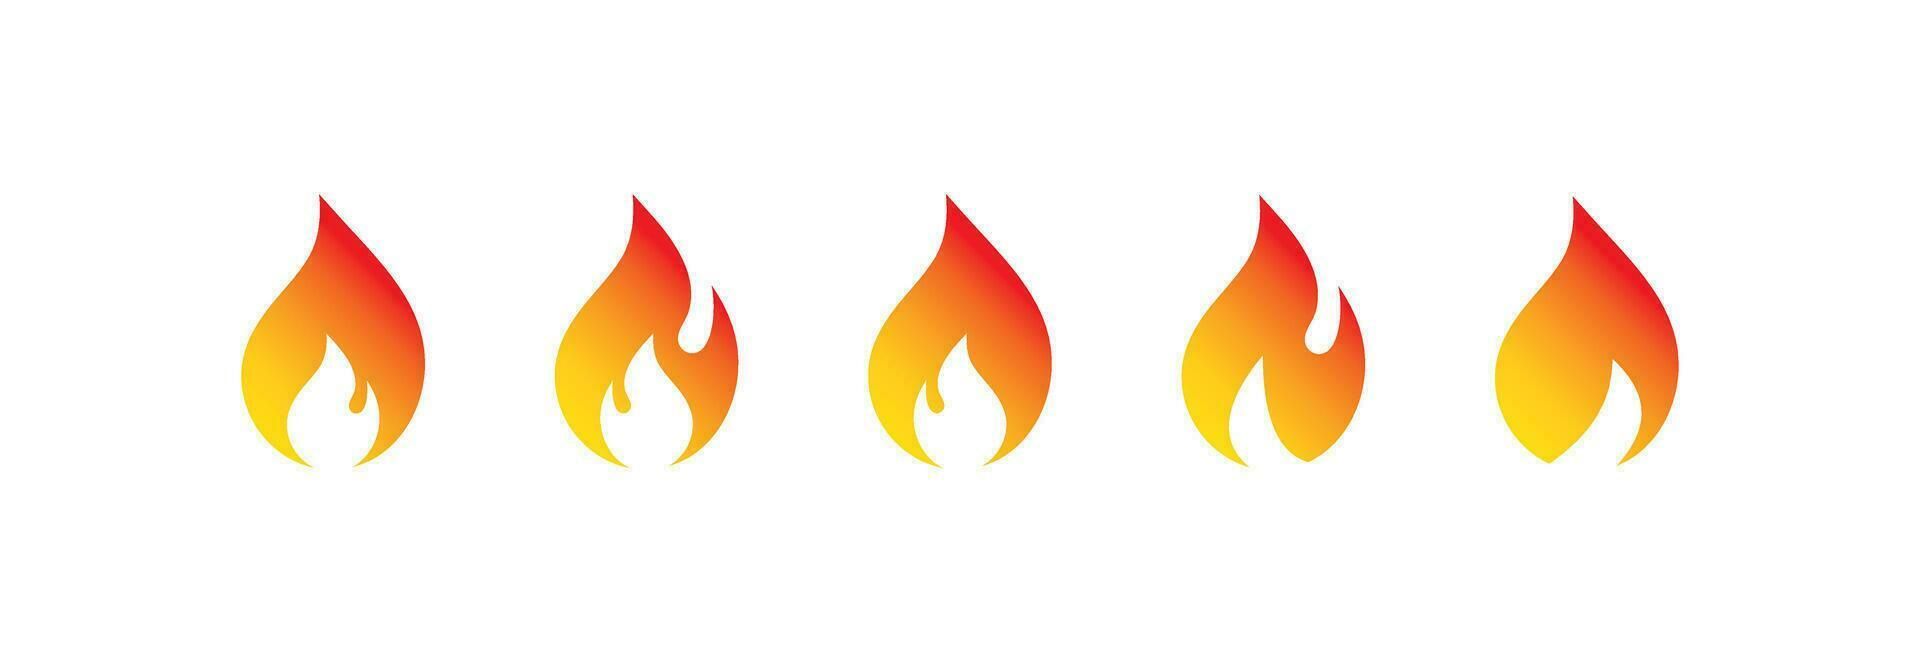 Fire icon set. Flame tongue vector